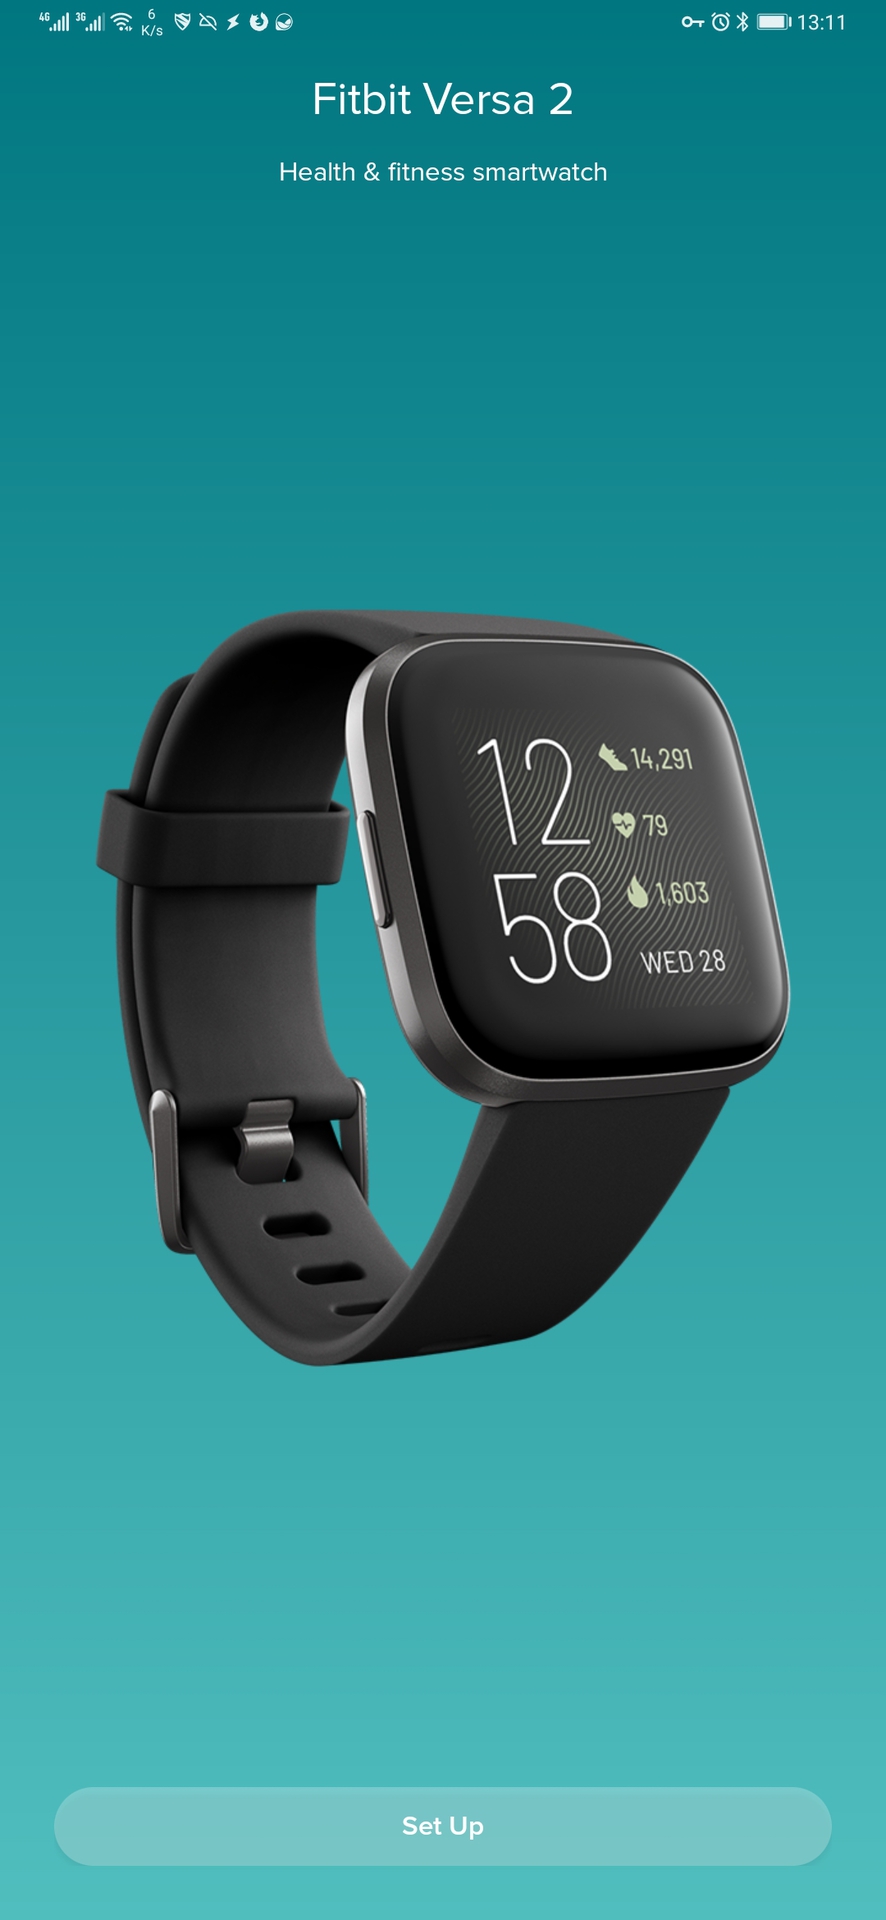 fitbit app device selection page